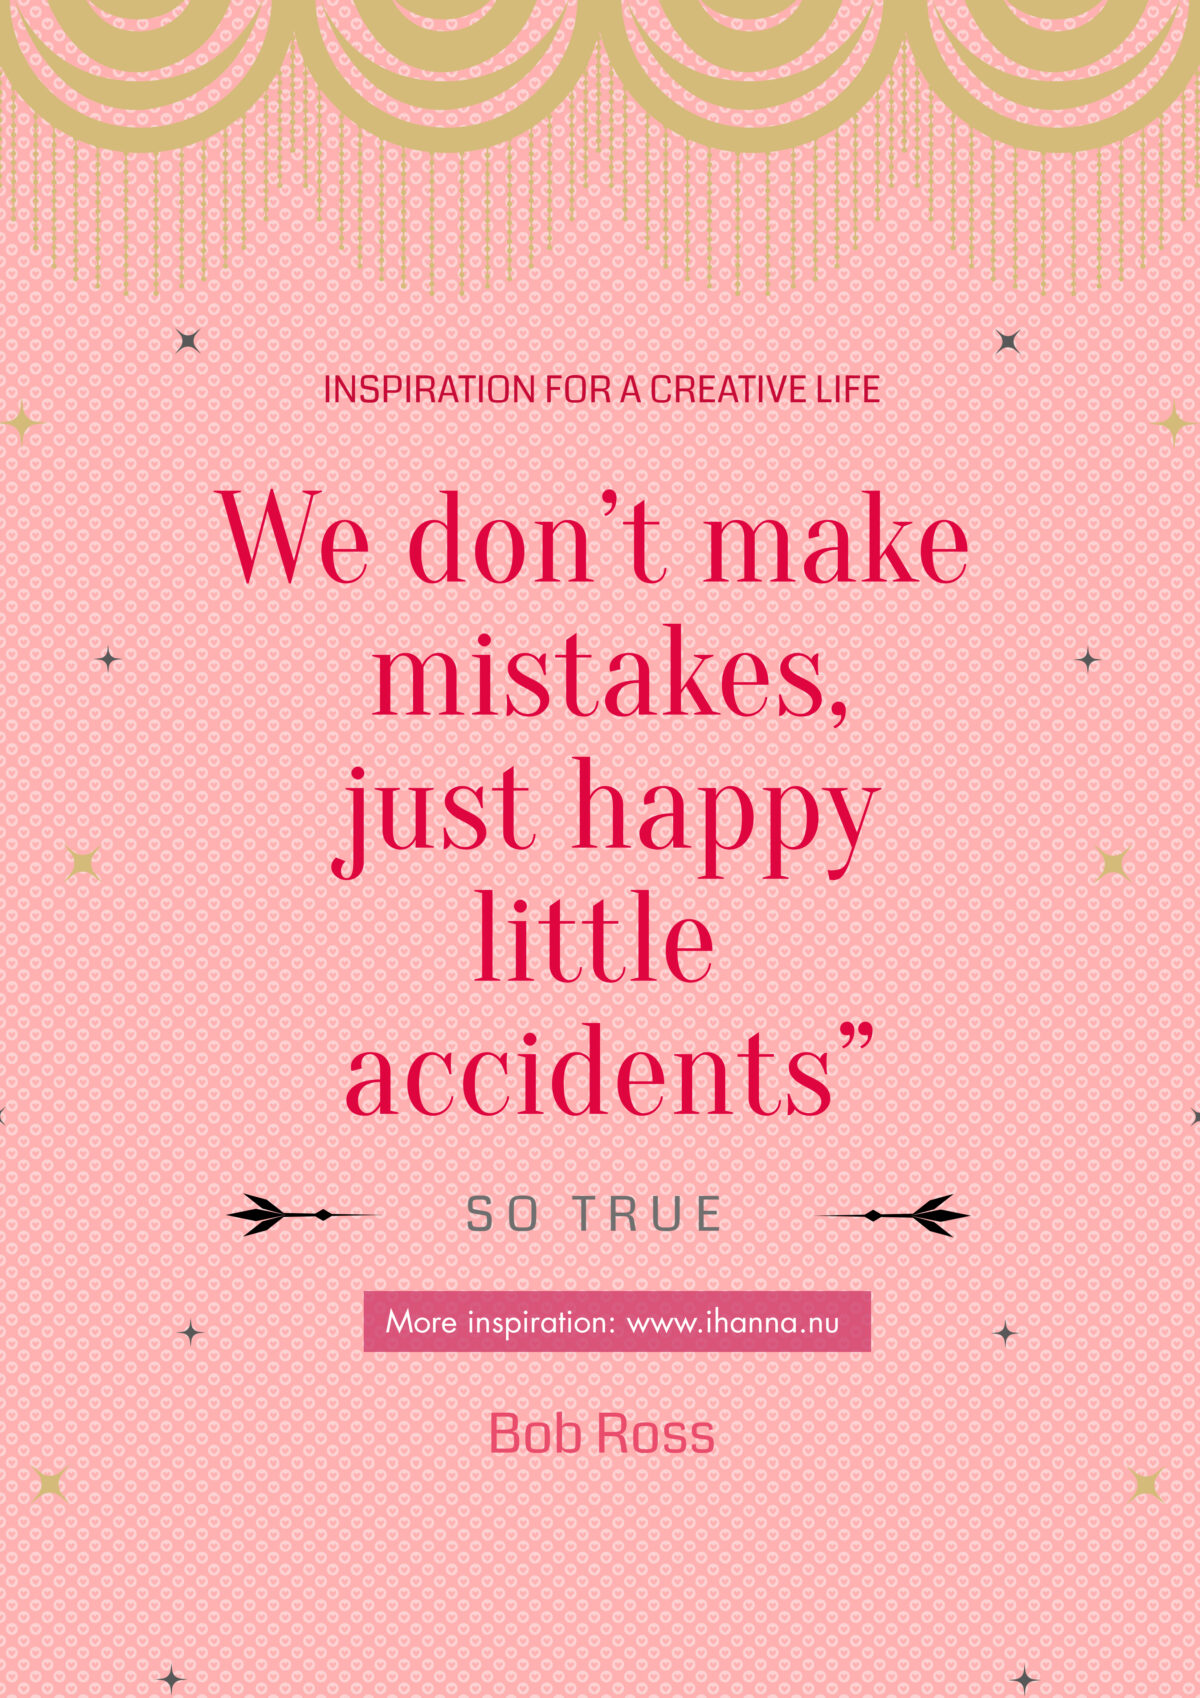 Bob Ross quote at iHanna: We dont make mistakes, just happy little accidents - PIN THIS